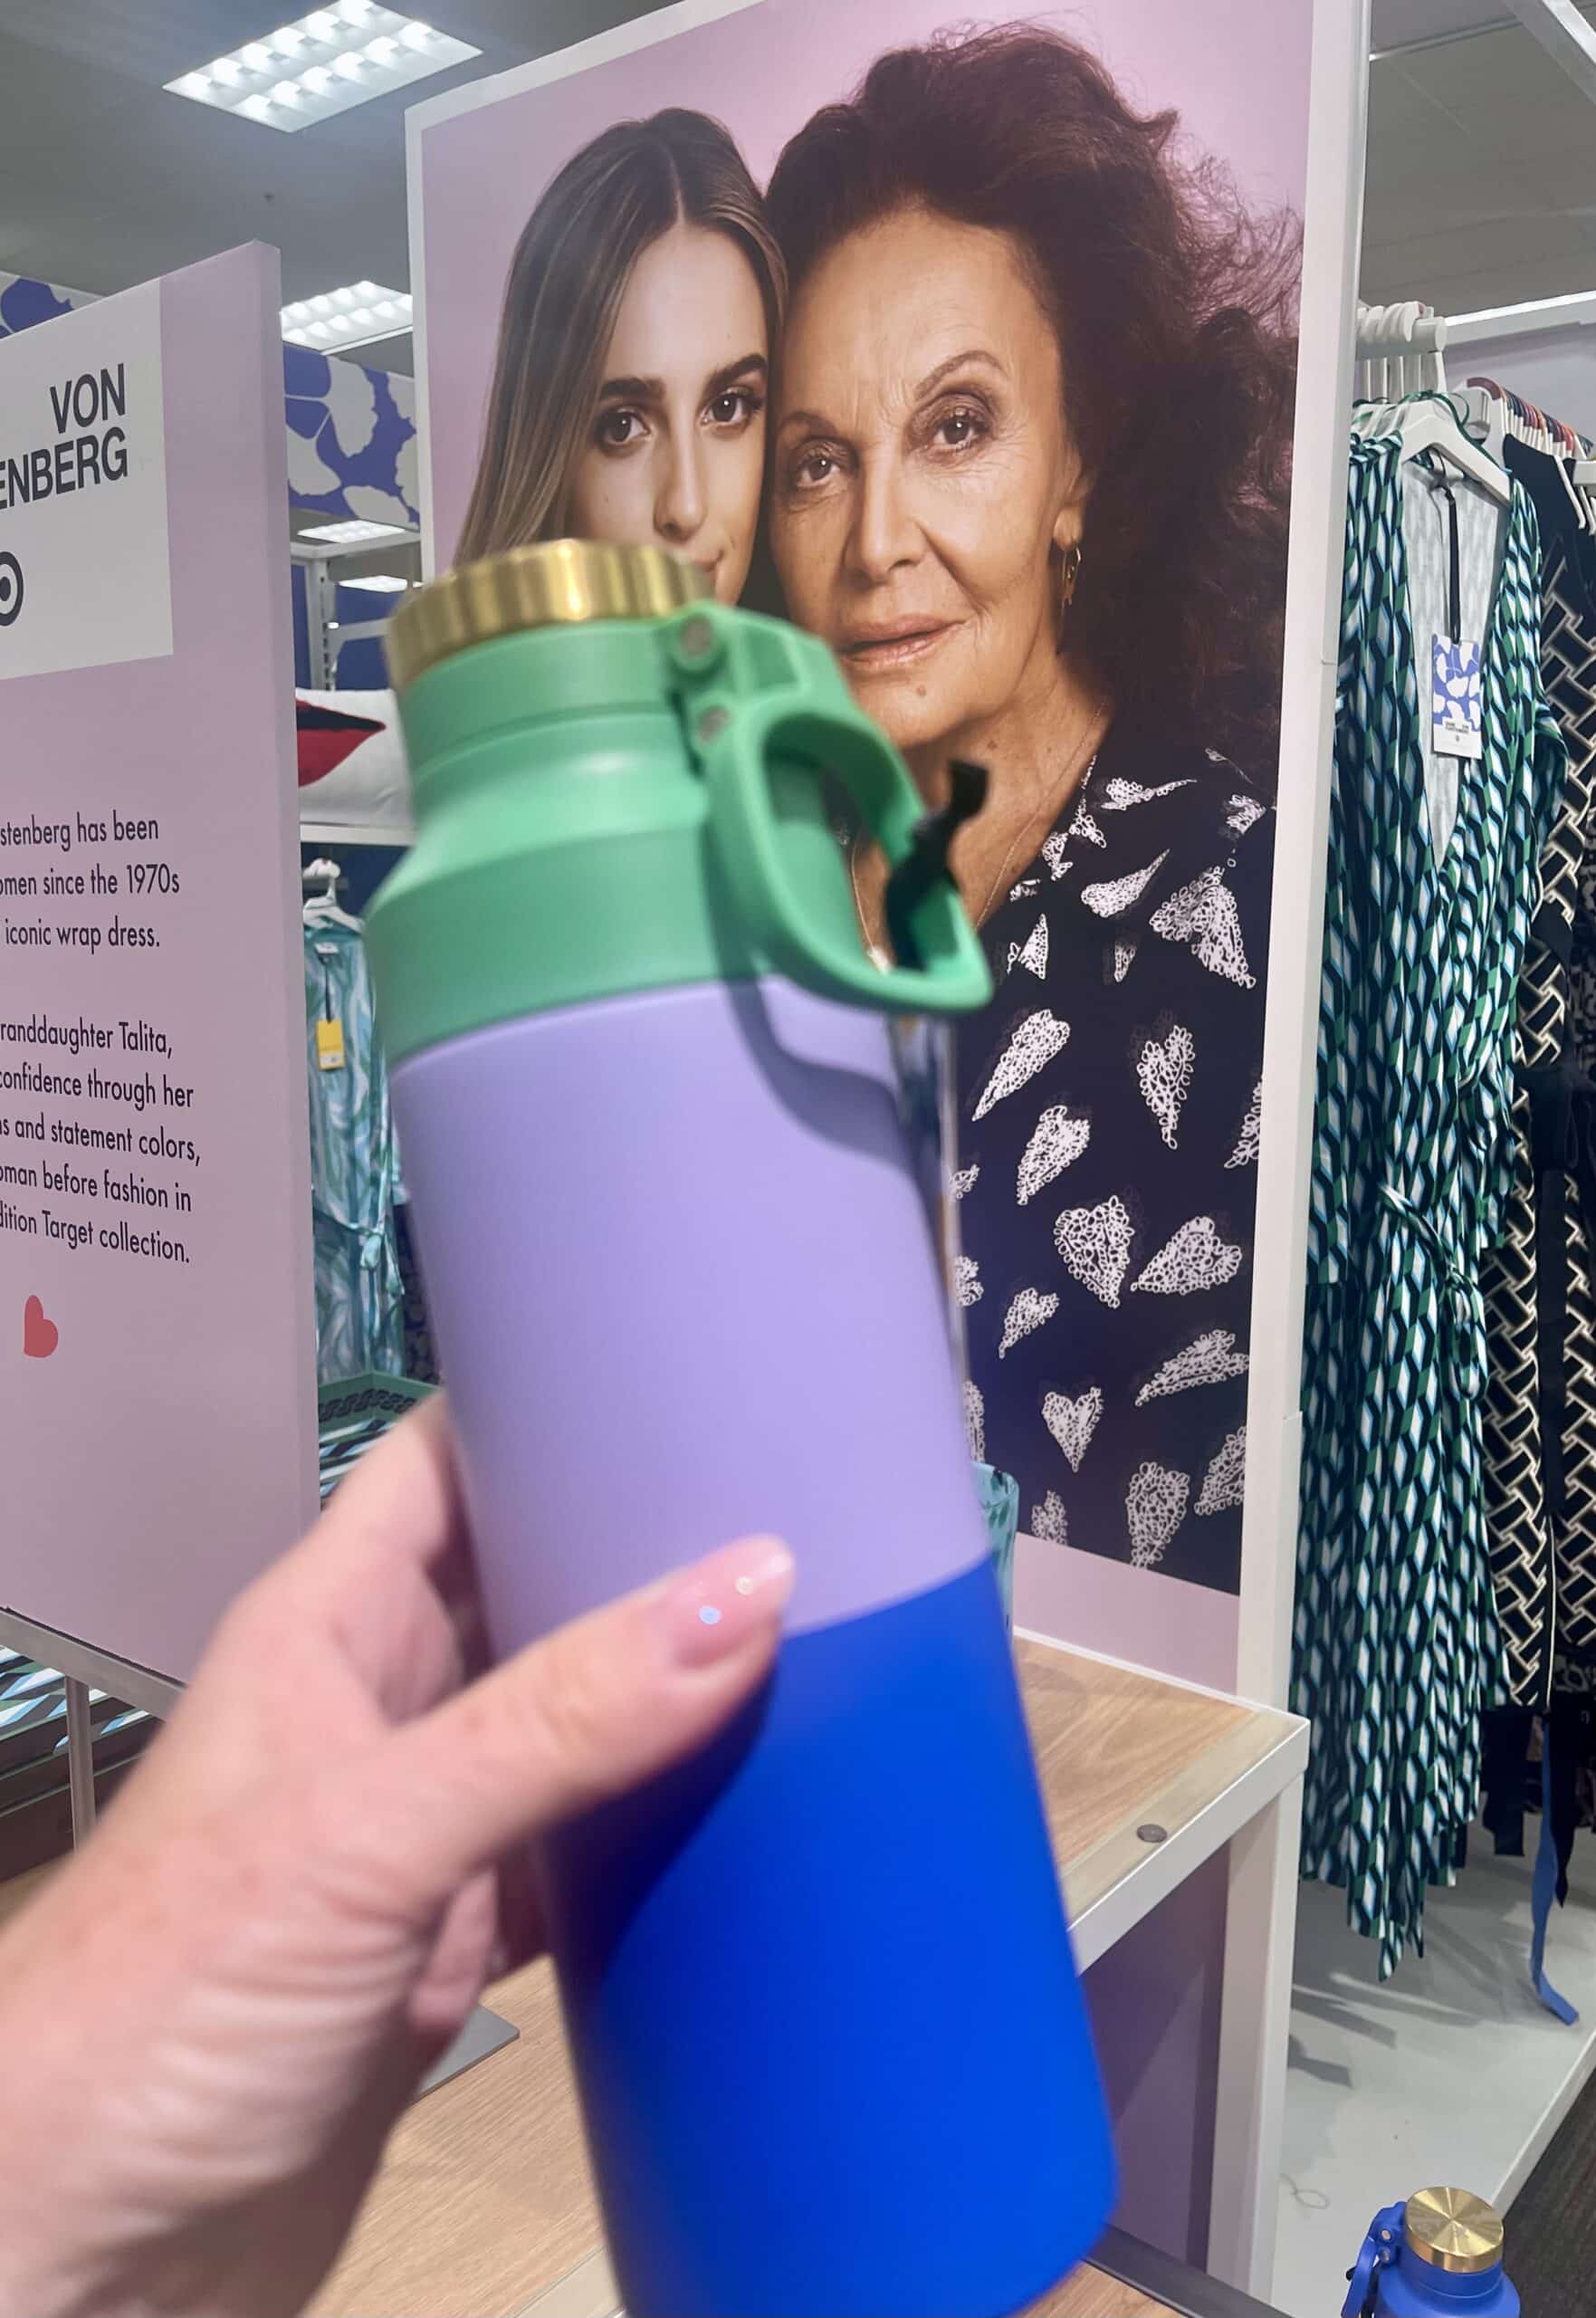 colorful waterbottle from the DVF collection for Target